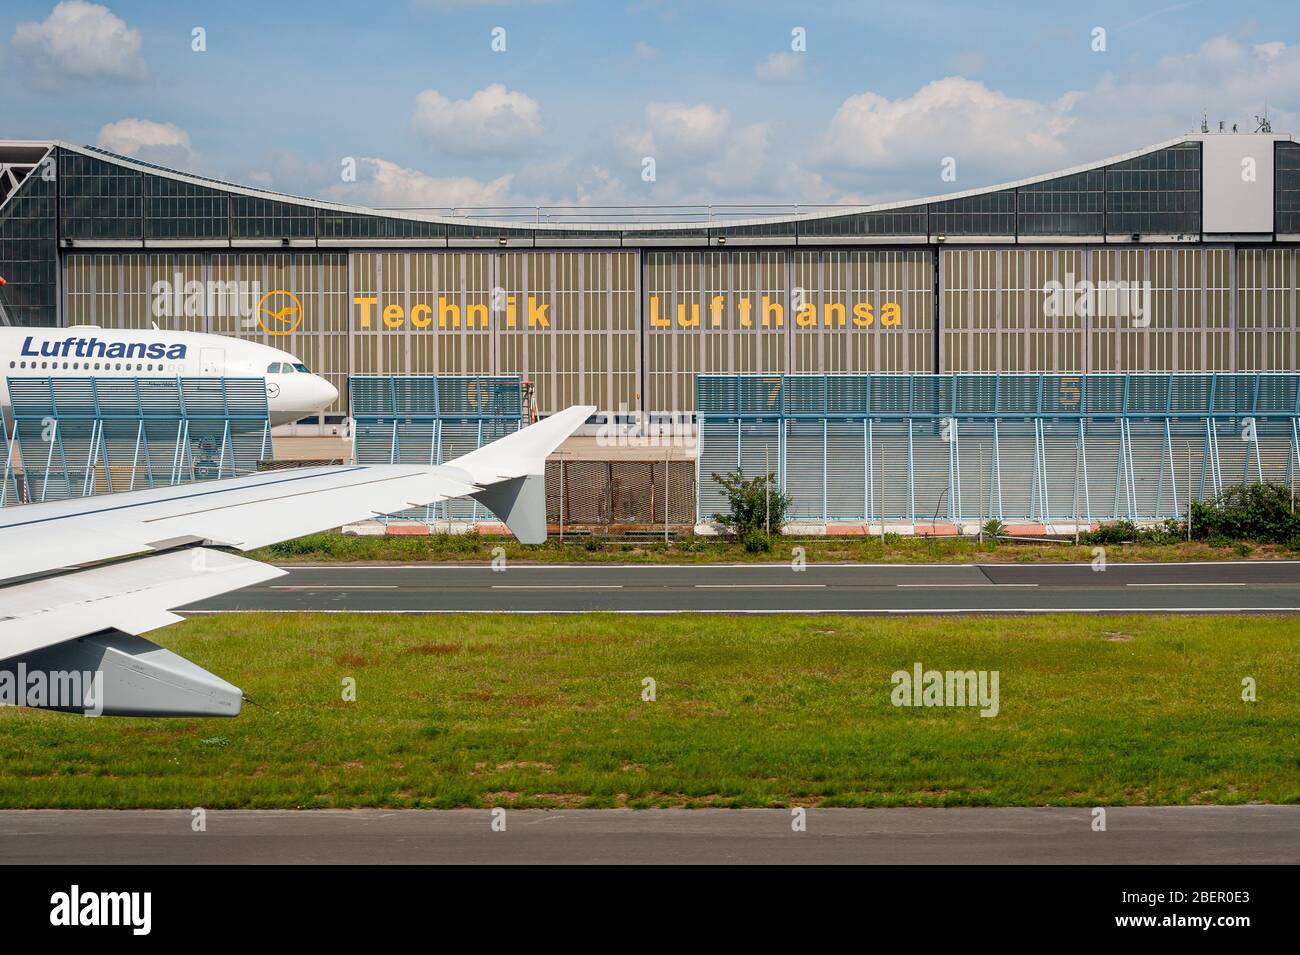 05/26/2019. Frankfurt Airport, Germany. Airbus by Lufthansa Technik maintenance hangar. Operated by Fraport and serves as the main hub for Lufthansa. Stock Photo